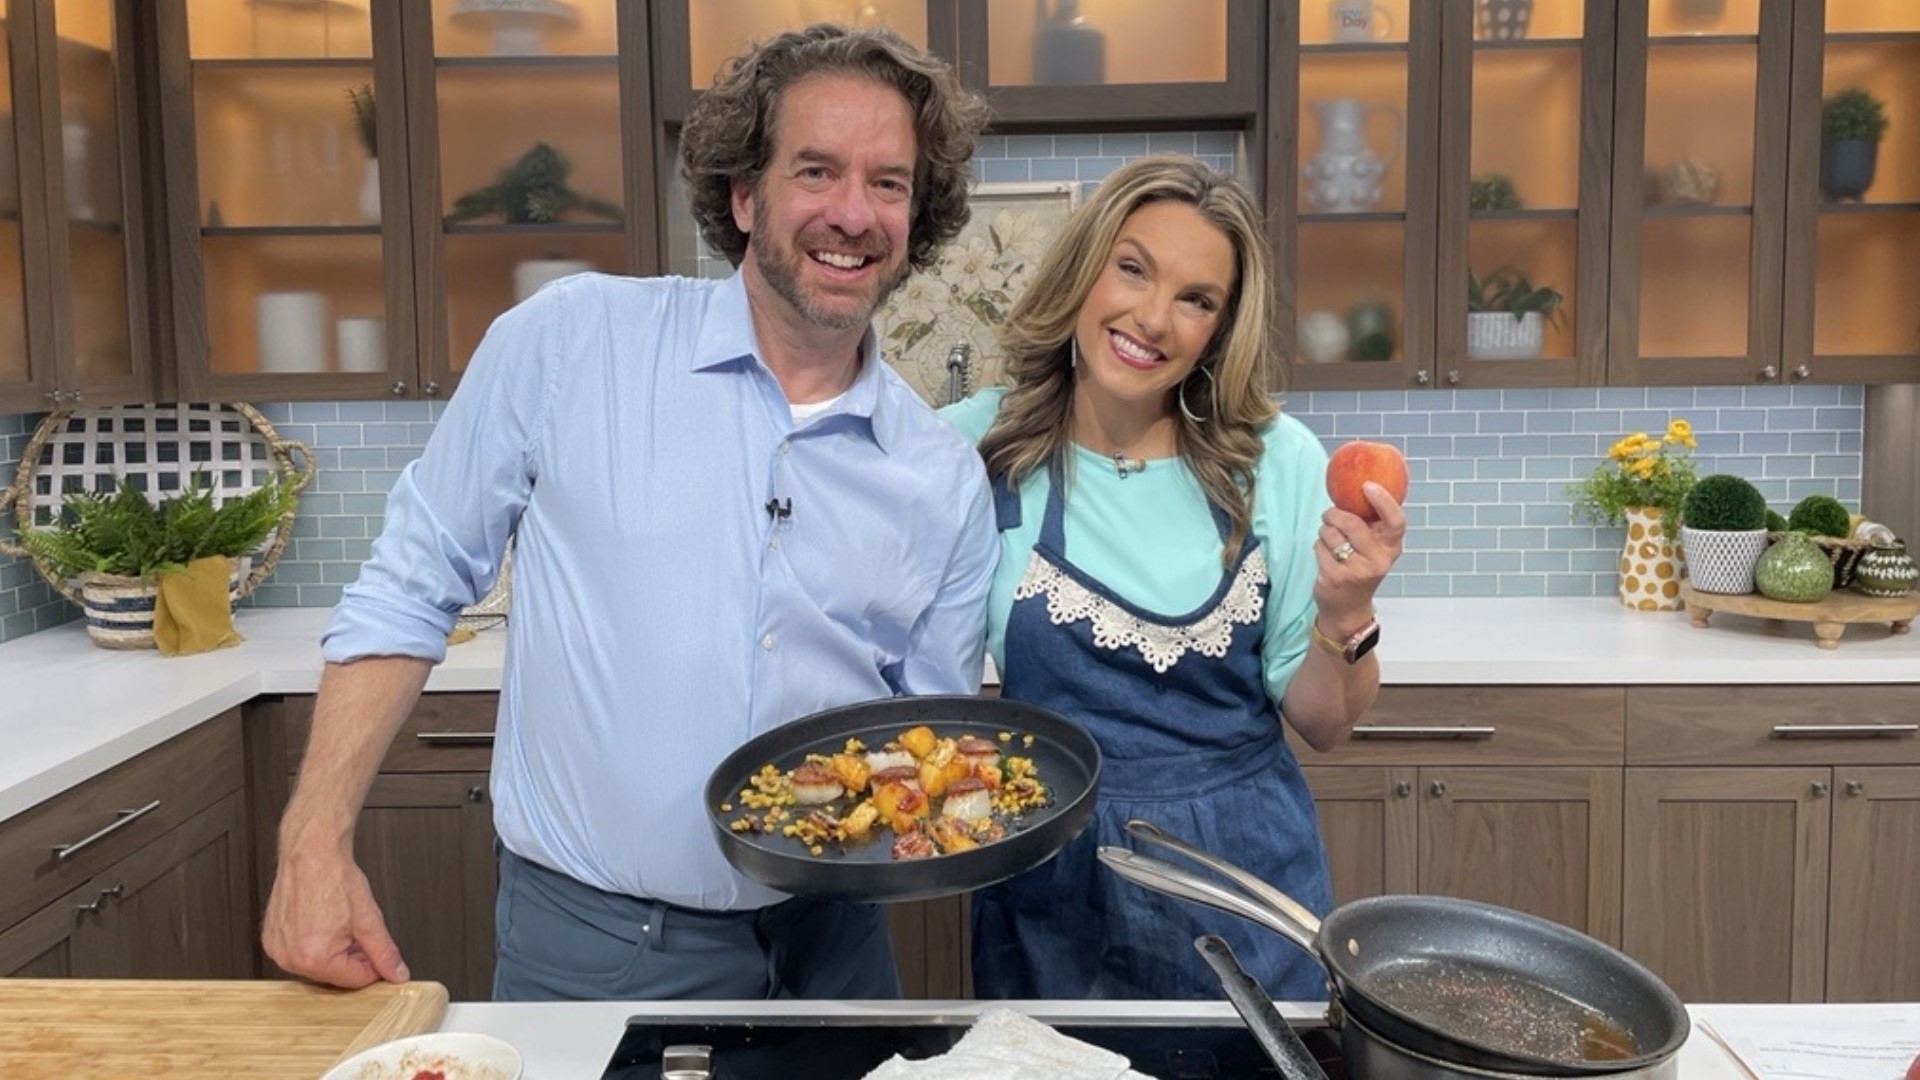 Chef Jason Wilson from The Lakehouse loves using peaches in his summer dishes. His peach salad with pistachios is another peachy delight. #newdaynw